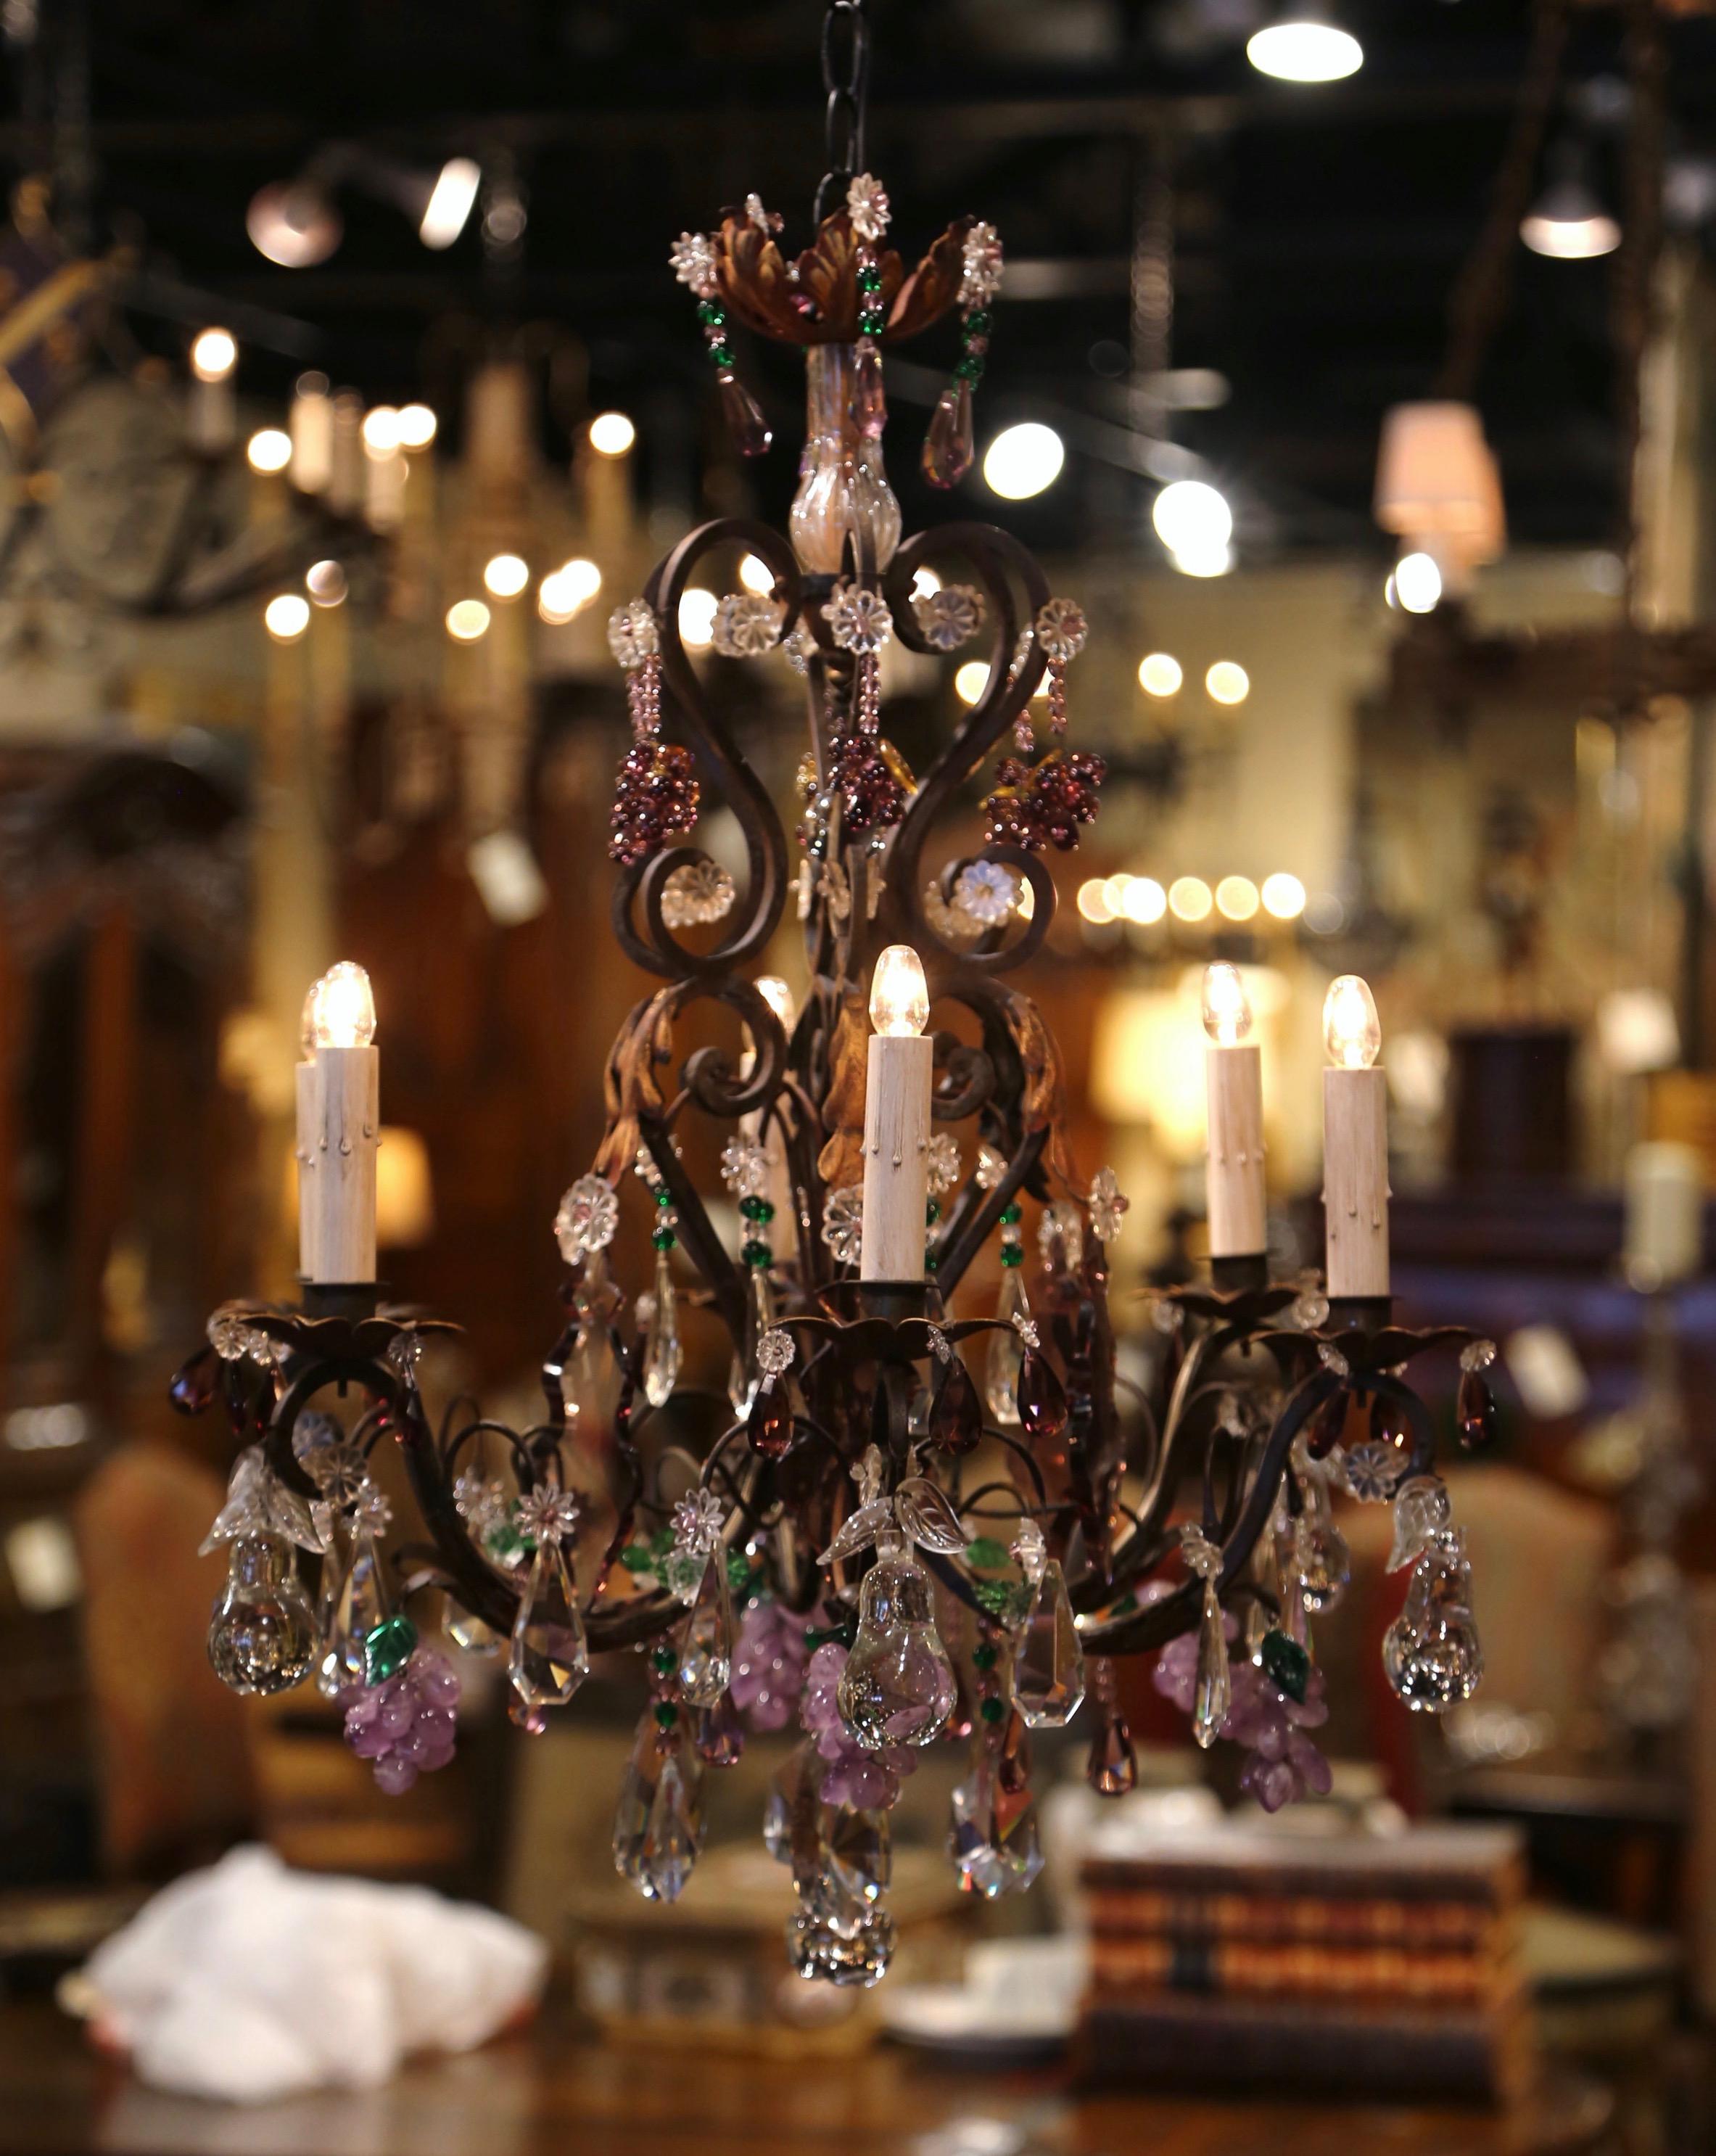 Decorate an entry or a girl's room with this elegant antique light fixture. Crafted in France circa 1920, the colorful chandelier has six metal arms newly wired embellished with metal acanthus leaves, and dressed with candle sleeve covers. The